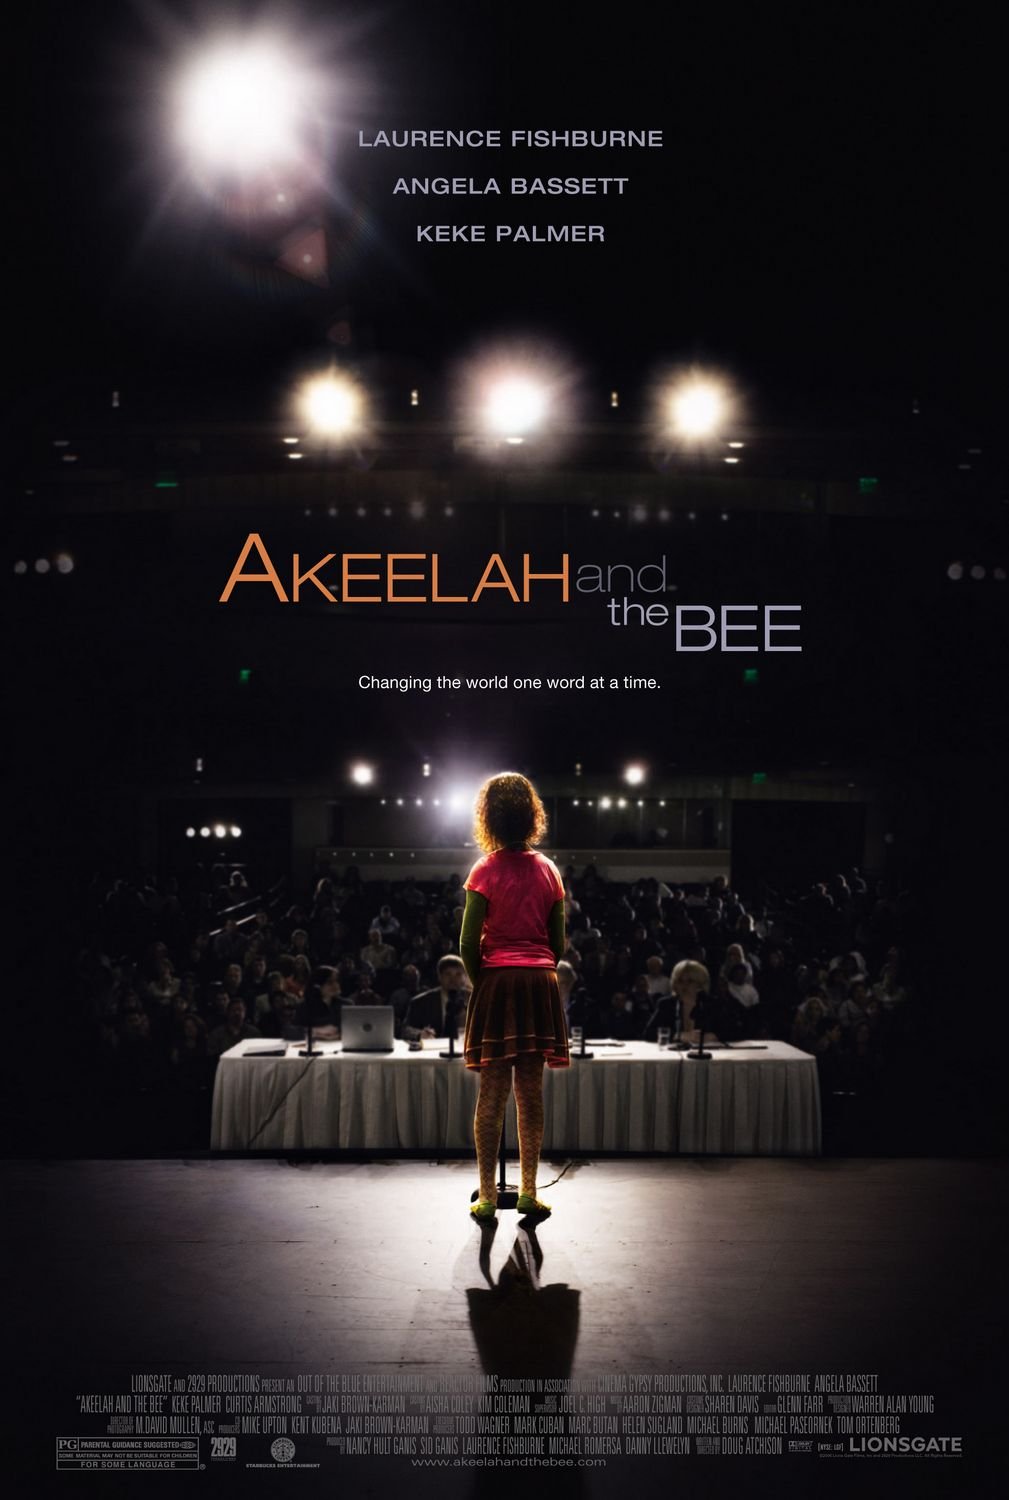 Poster of the movie Akeelah and the Bee